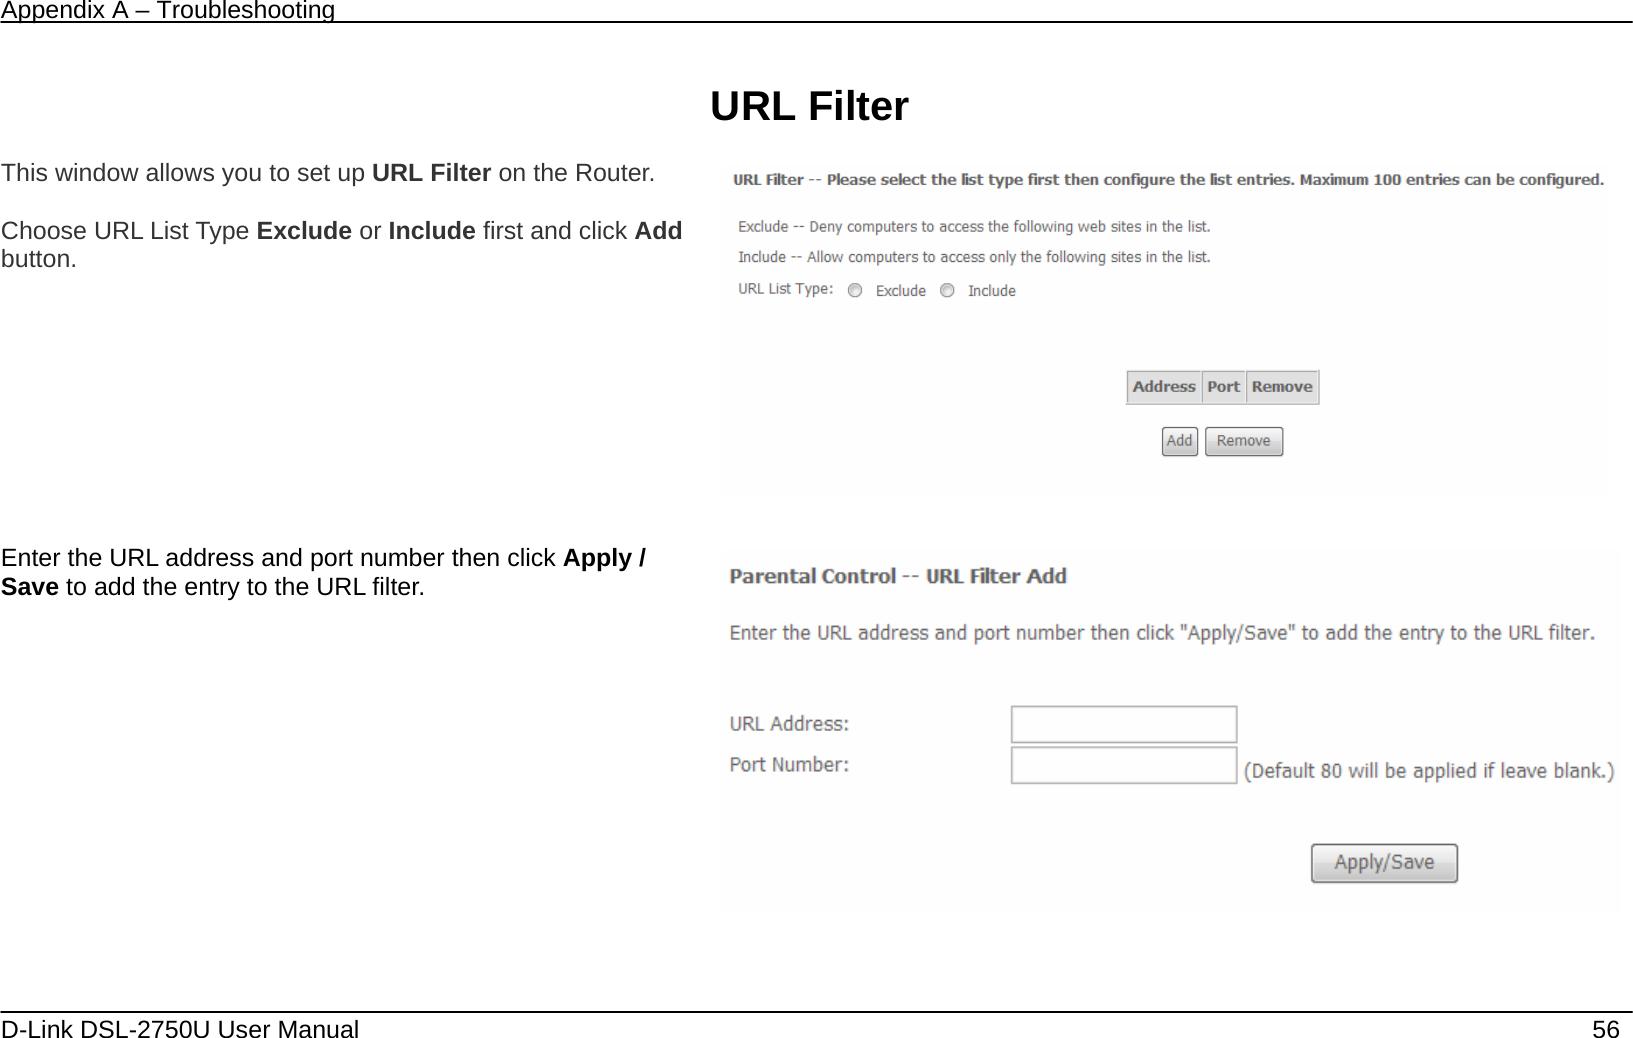 Appendix A – Troubleshooting   D-Link DSL-2750U User Manual    56  URL Filter  This window allows you to set up URL Filter on the Router.   Choose URL List Type Exclude or Include first and click Add button.    Enter the URL address and port number then click Apply / Save to add the entry to the URL filter.  